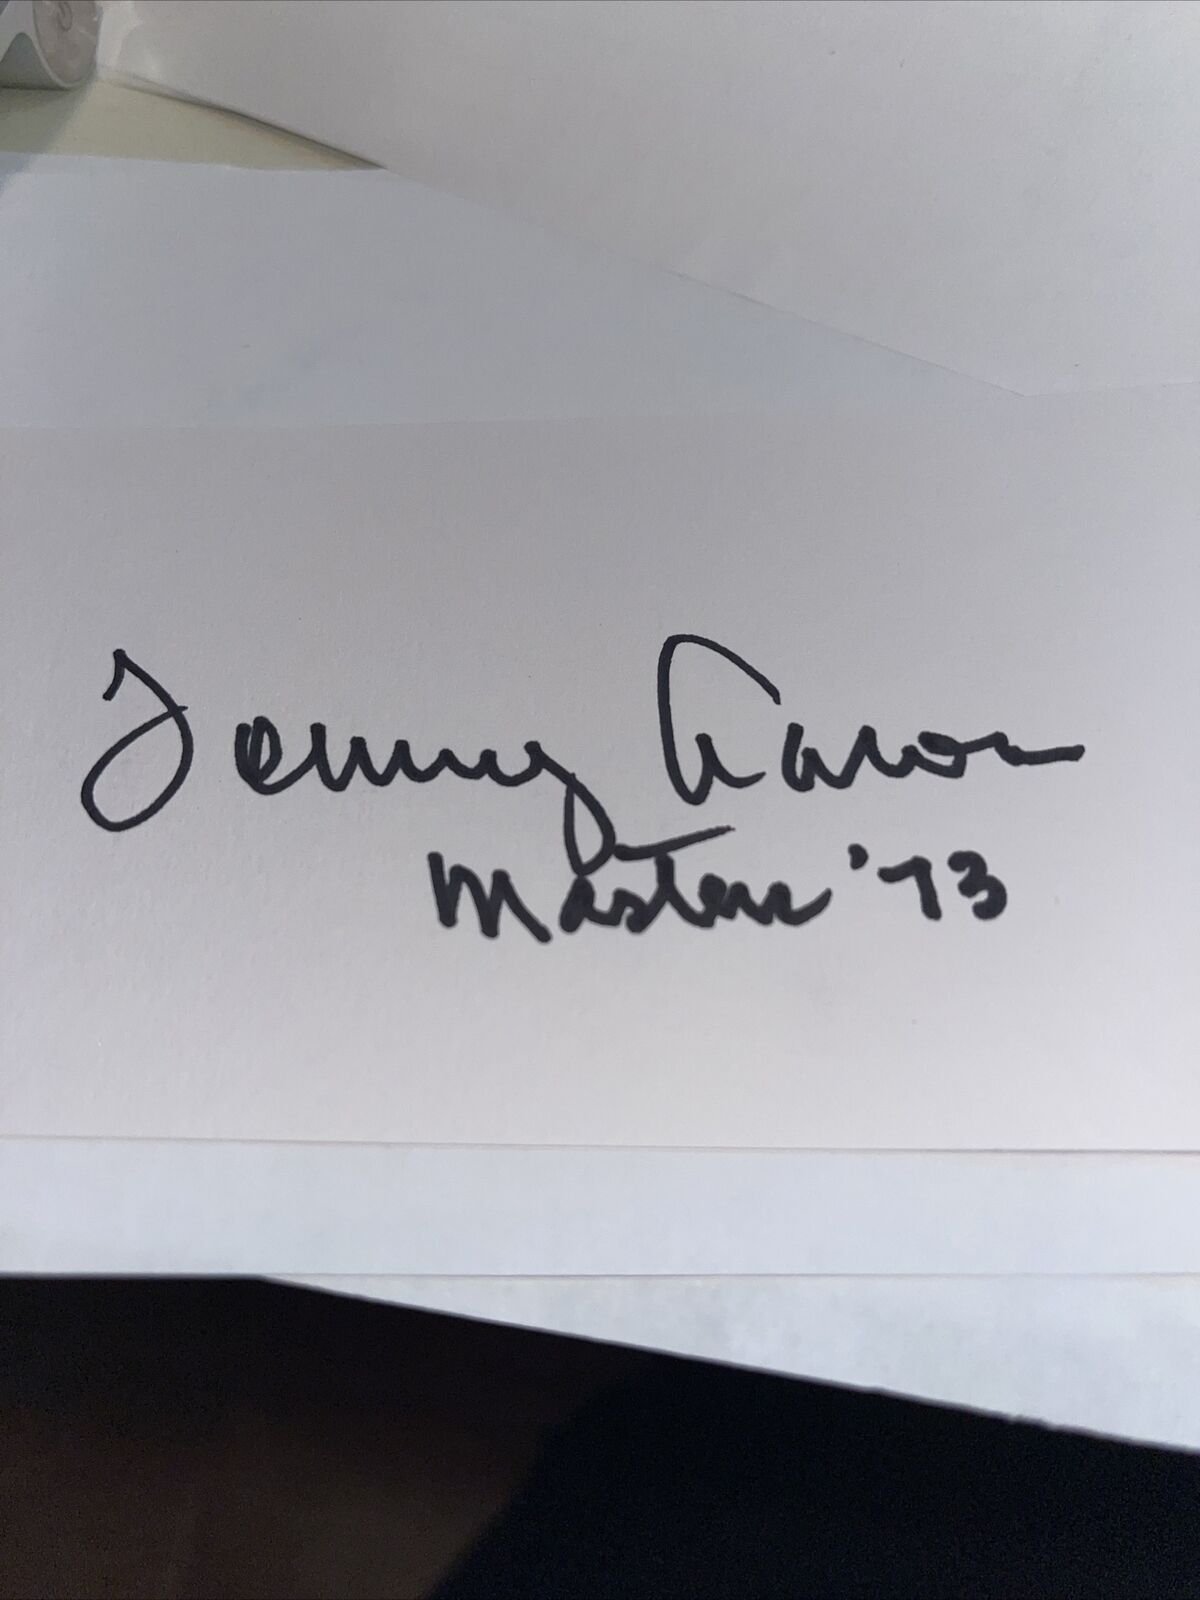 Tommy Aaron Masters Winner index 3x5 Signed Card Al Latest item sold out.